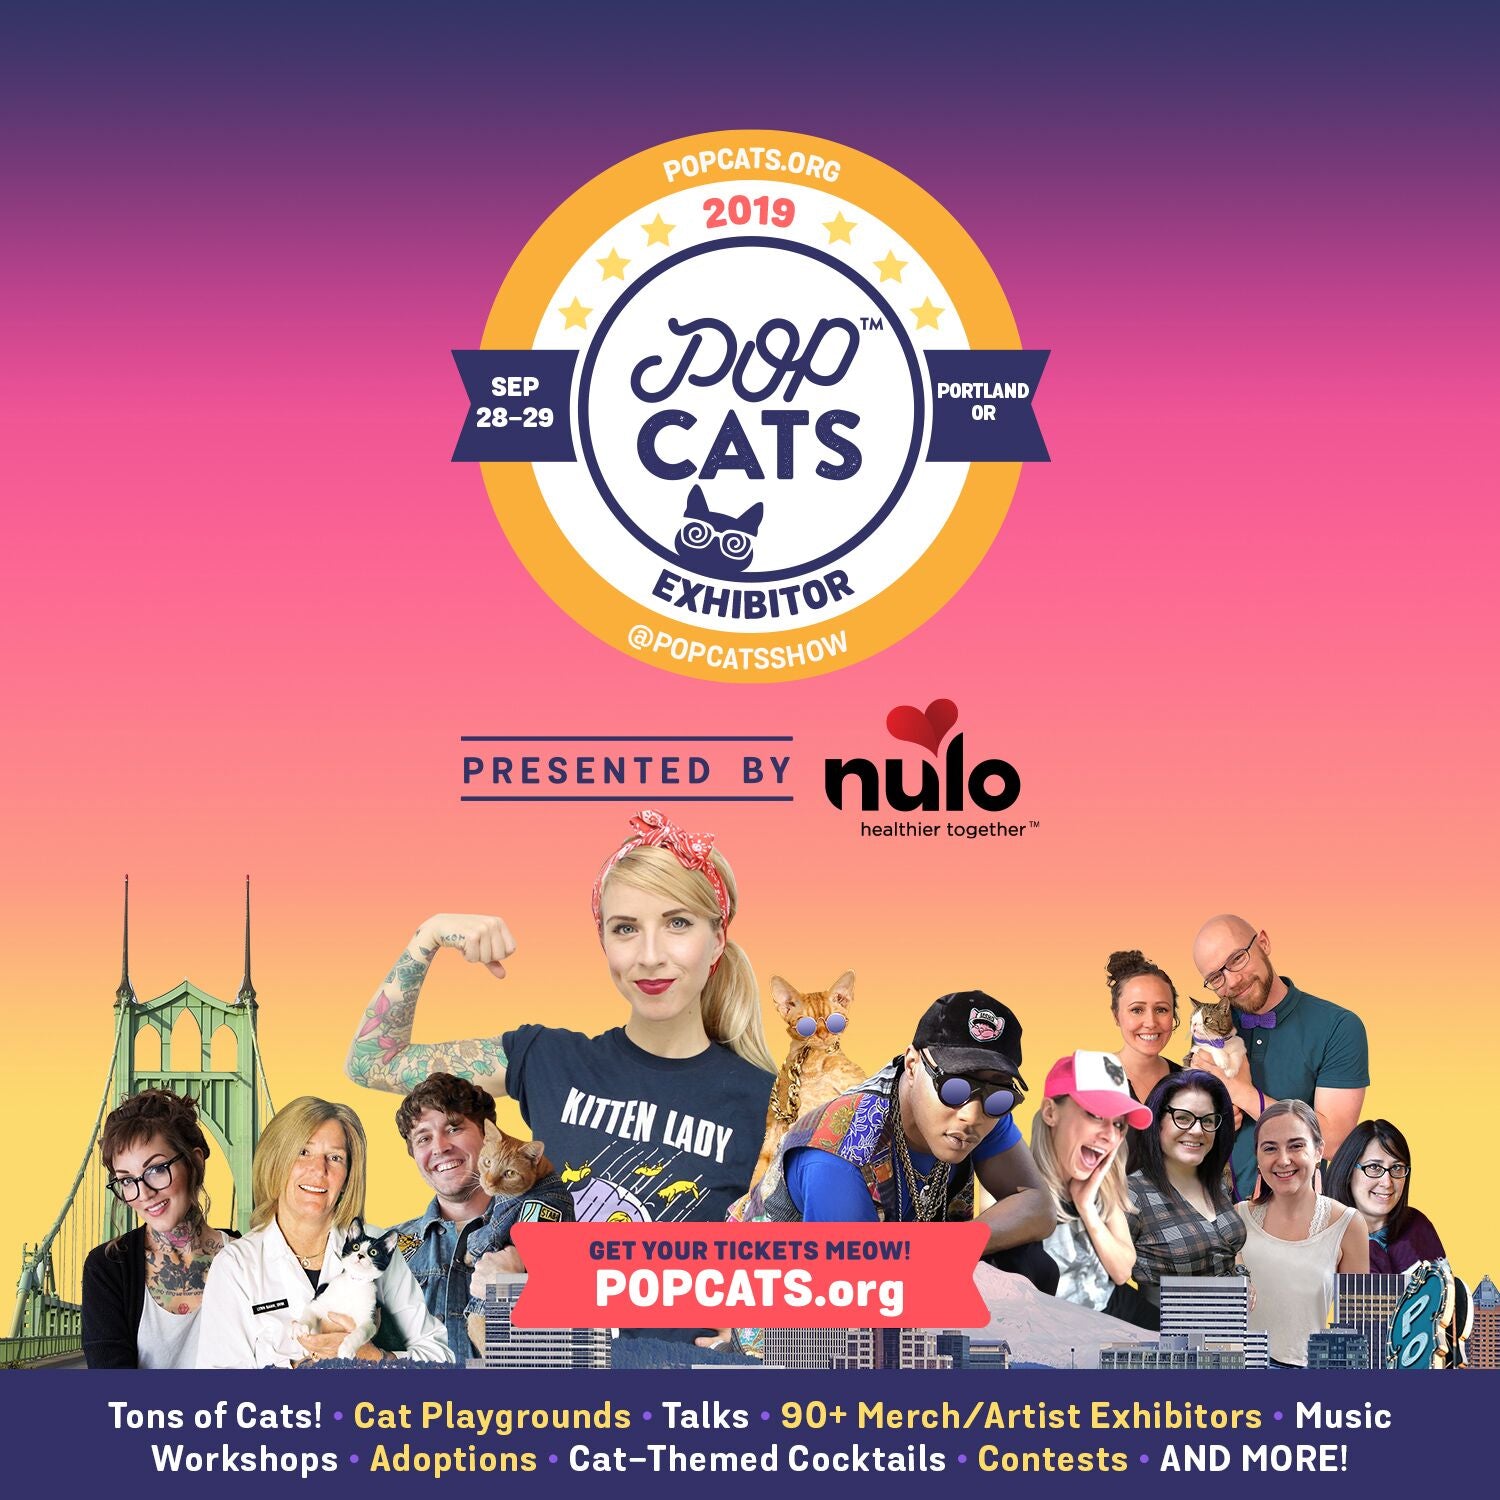 Cat-Guardians with Cats that Road Trip, Hike Mountains, and Visit Markets to Challenge “Scaredy-Cat” Stereotype at “POP Cats” Panel Moderated By Your Cat Backpack